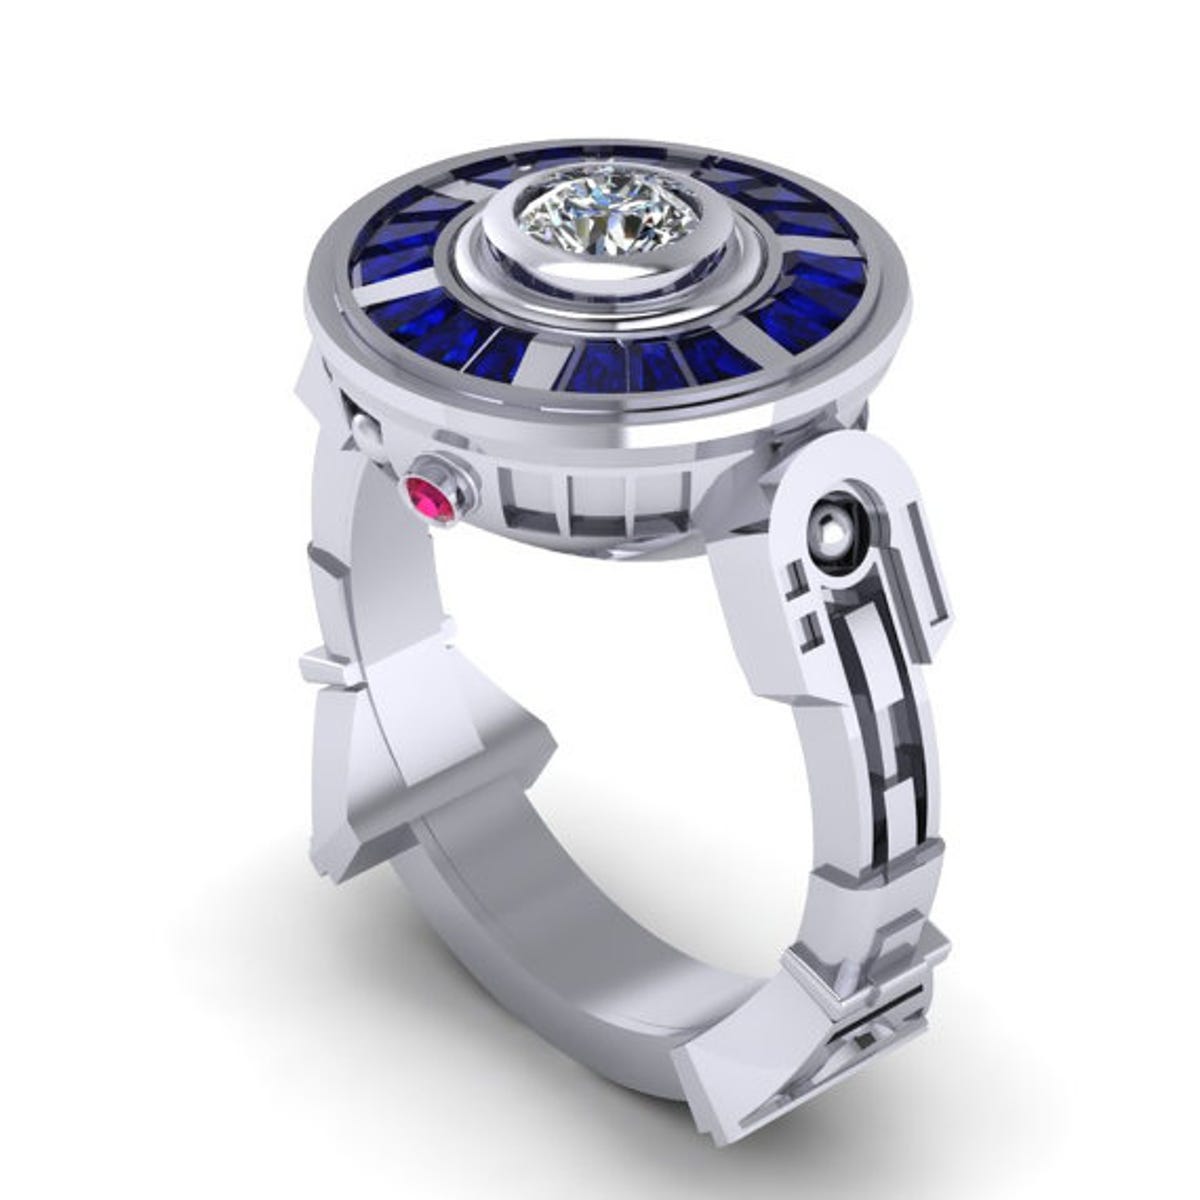 Your love will say 'I do' to the R2-D2 ring.